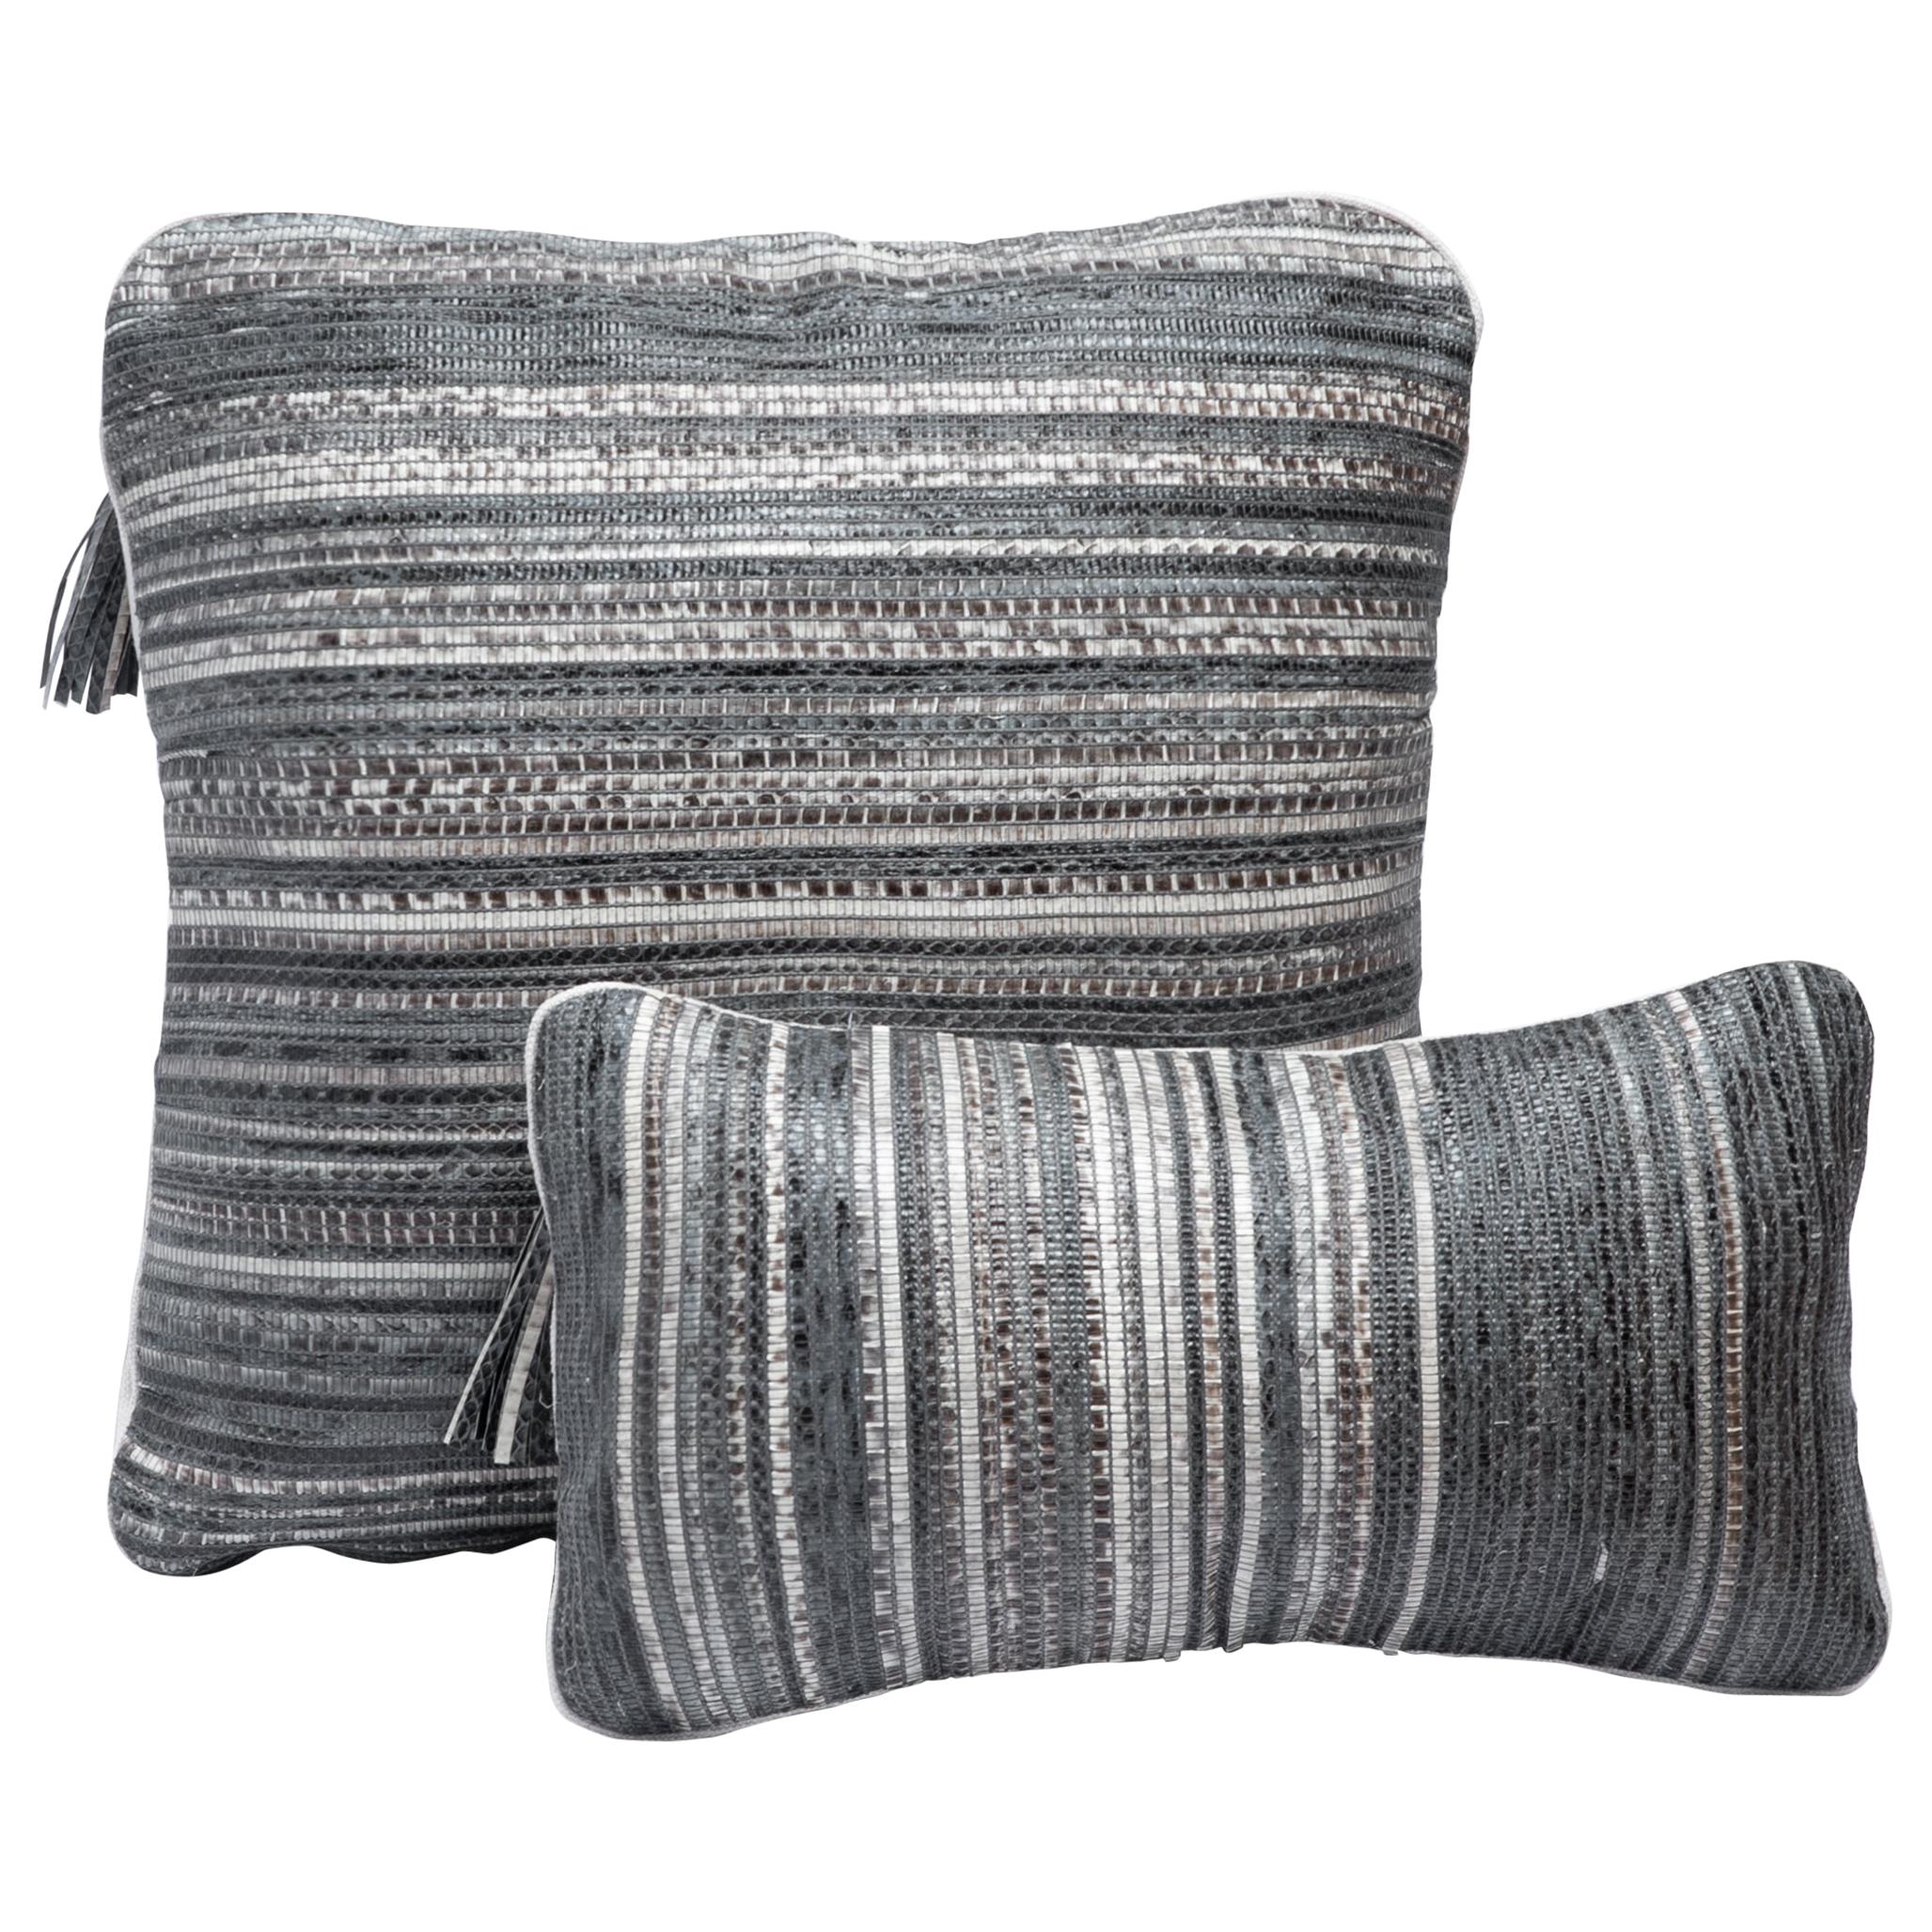 Pillow Set in Woven Snakeskin by Kifu Paris For Sale